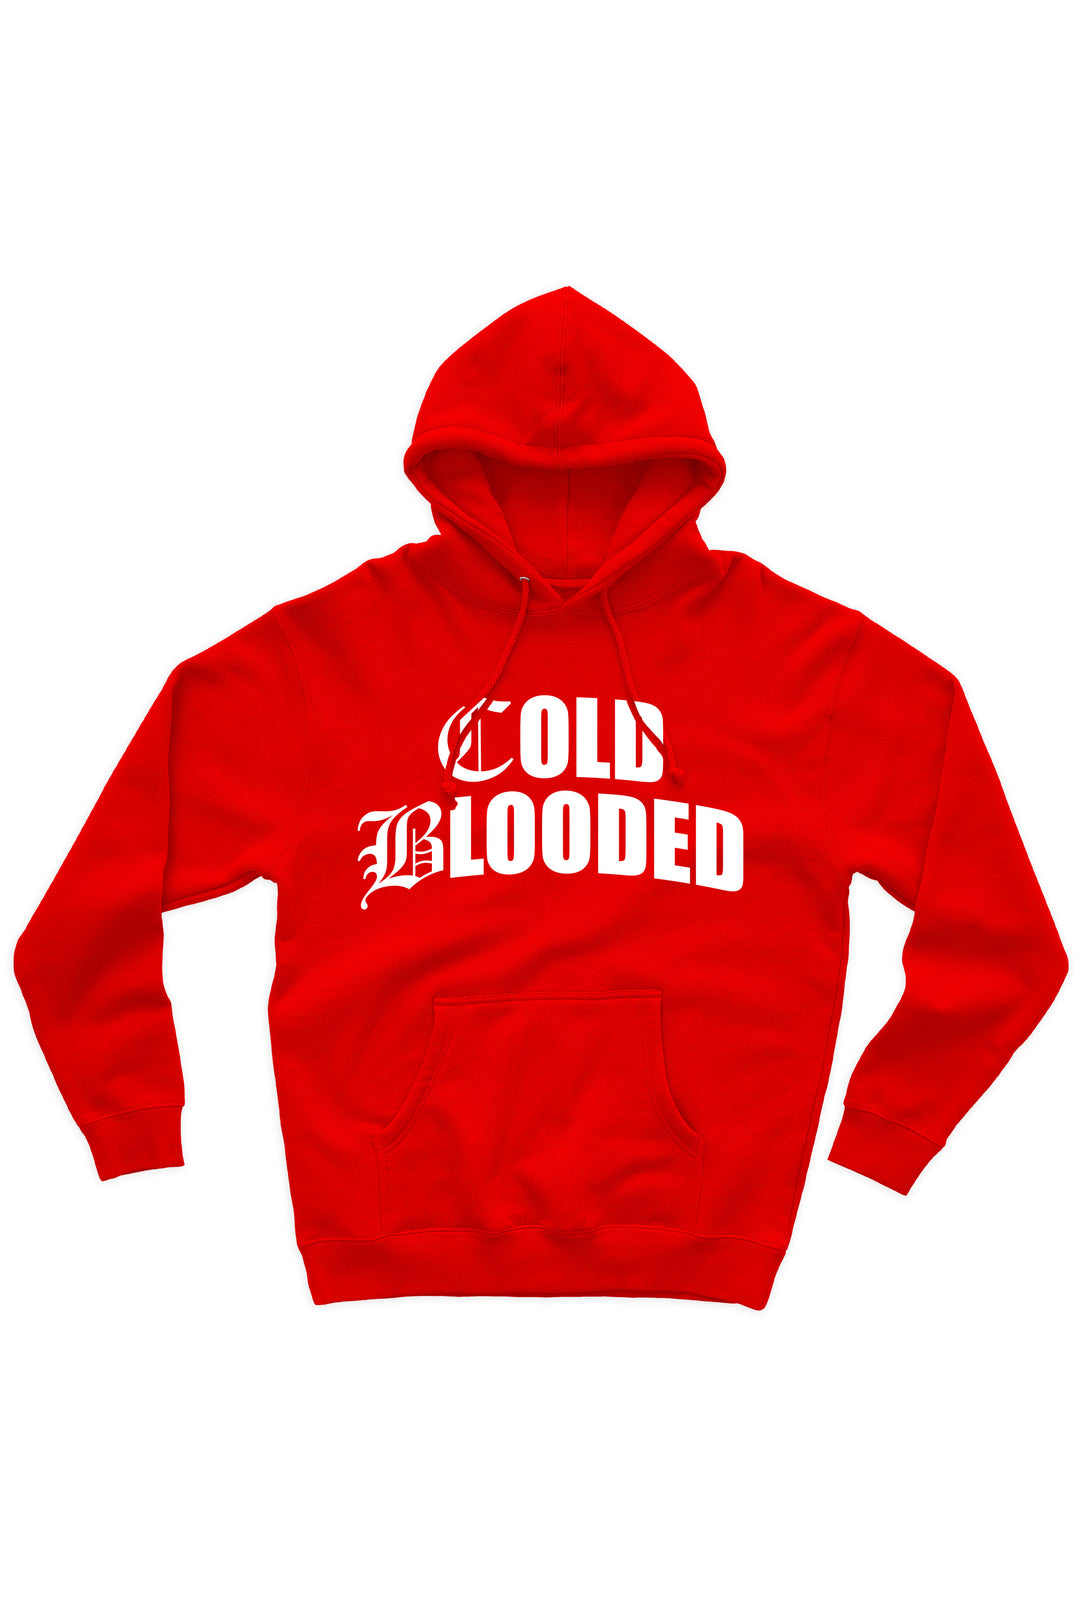 Cold Blooded Hoodie (White Logo) - Zamage